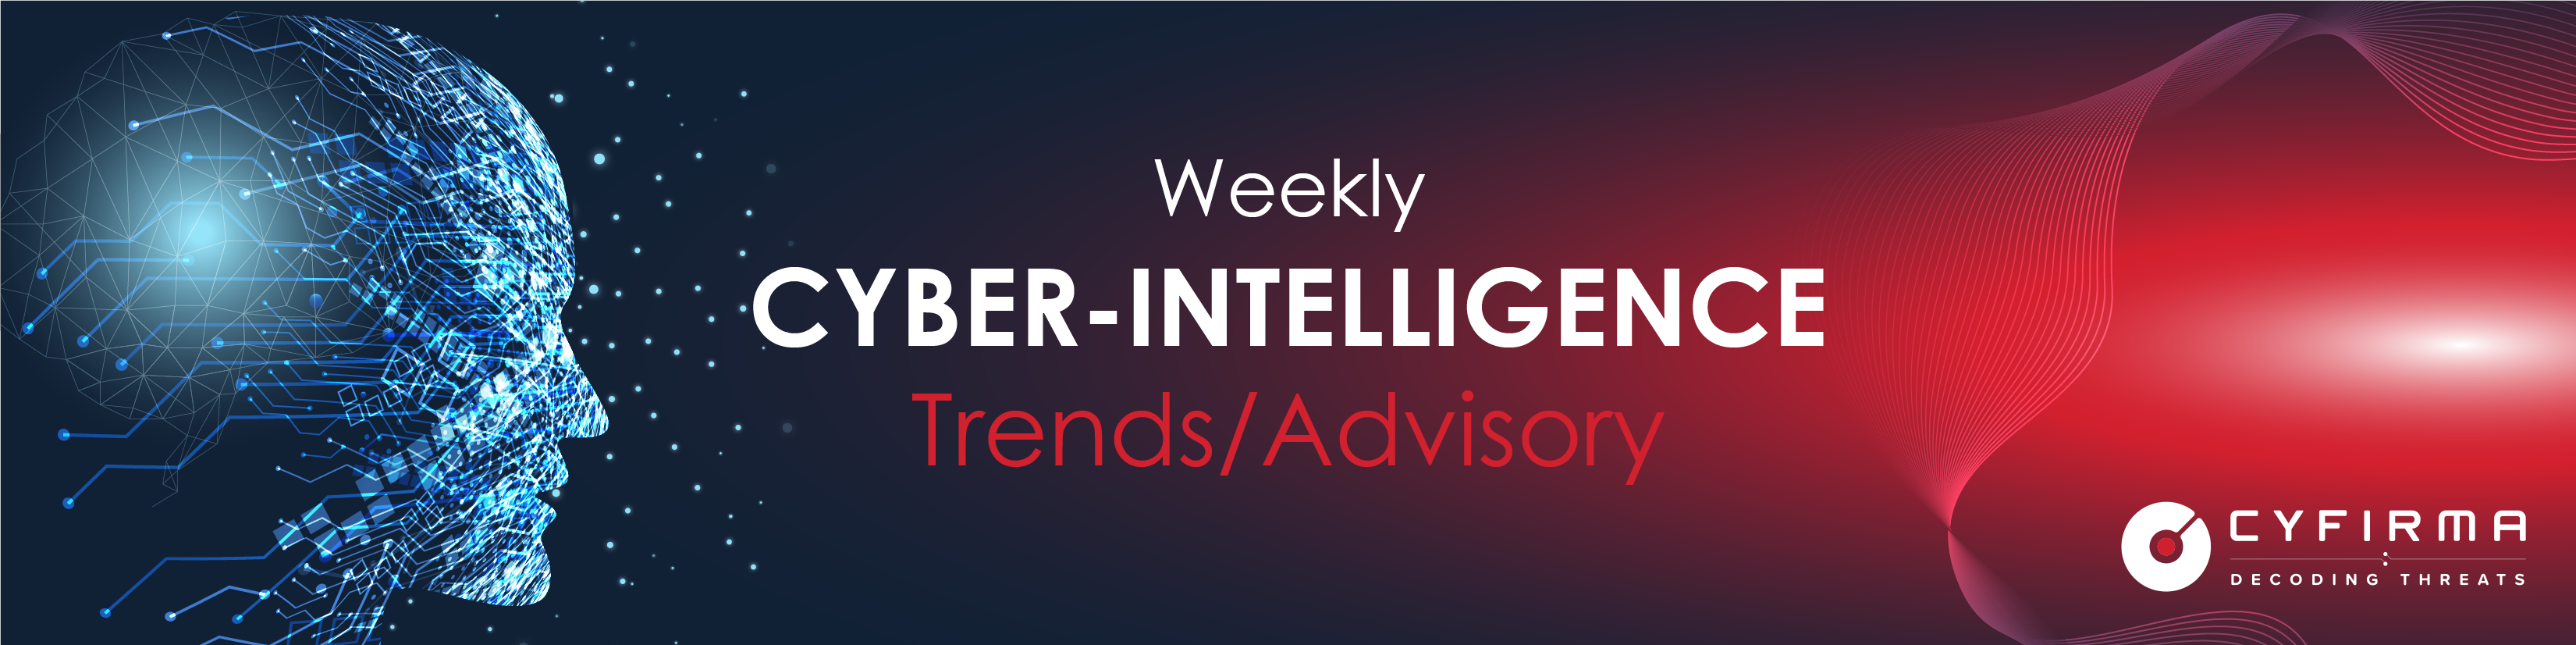 Weekly Cyber-Intelligence Trends and Advisory – 20 Mar 2022